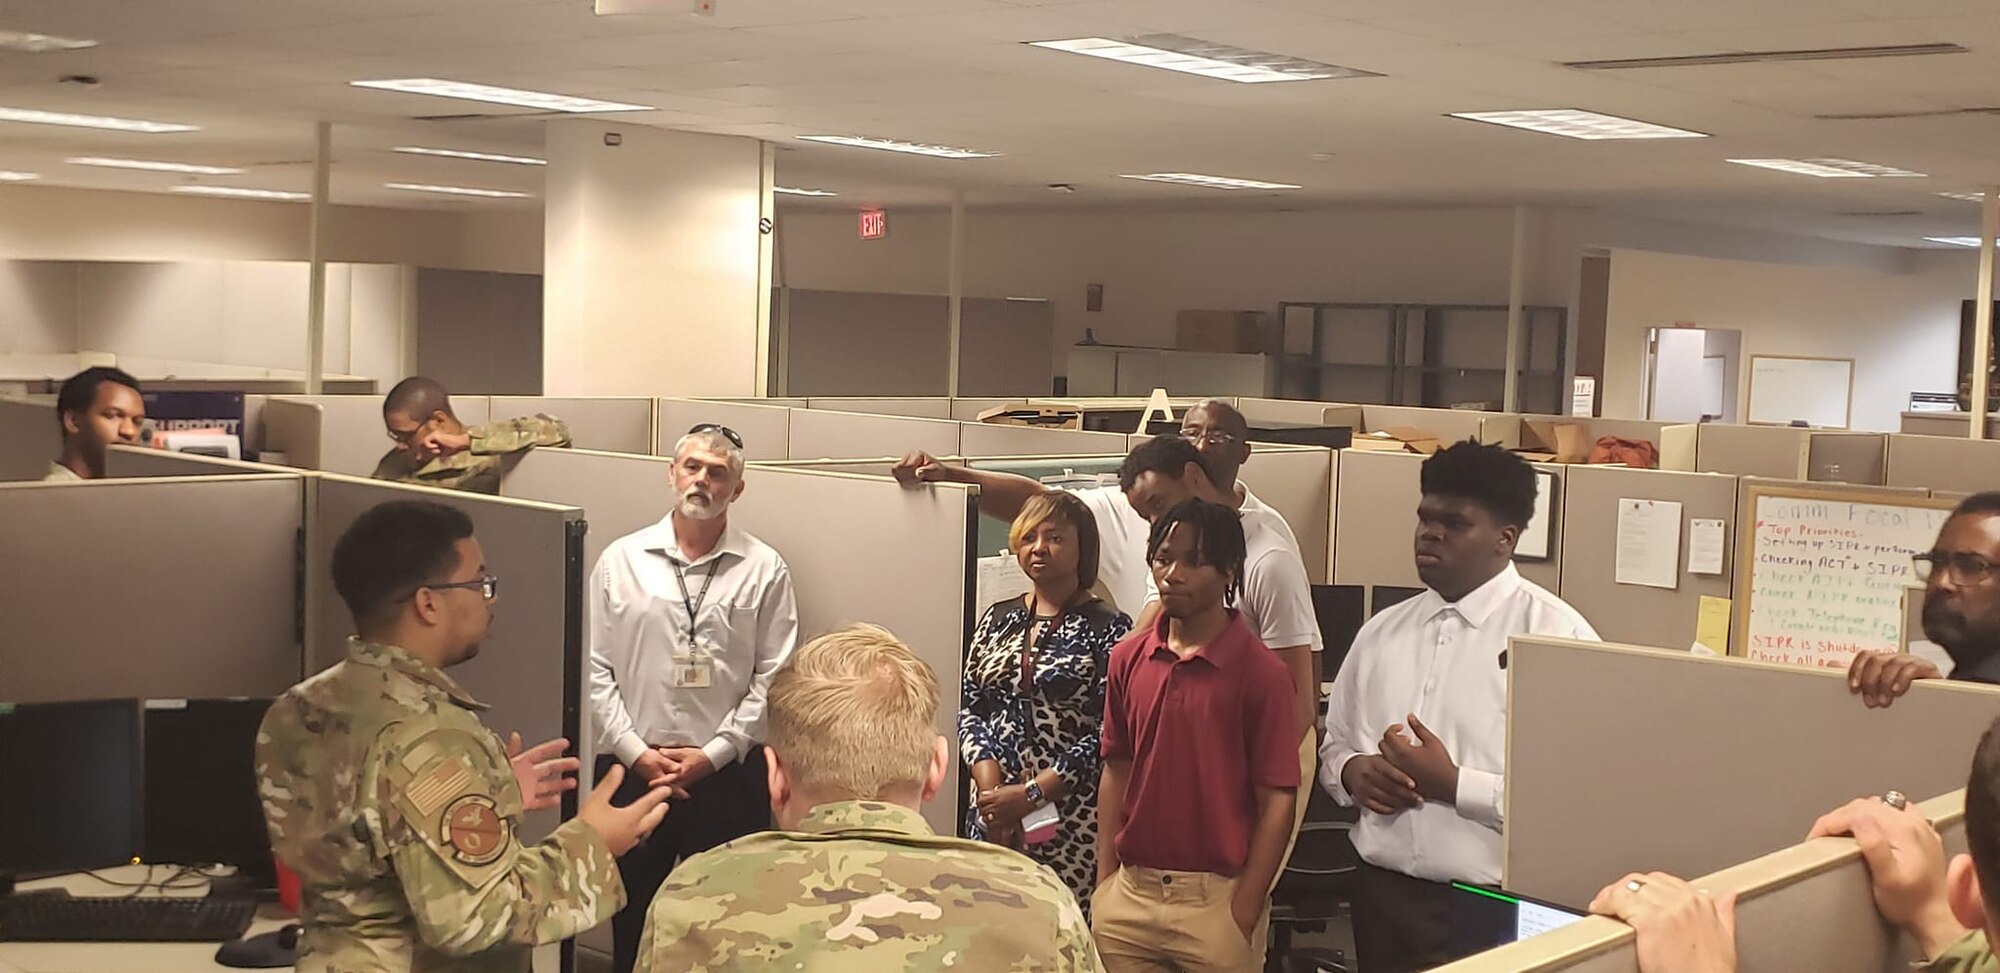 Montgomery Preparatory Academy for Career Technologies students toured the 42nd Communications Squadron. Montgomery technical students with an interest in careers at Maxwell AFB were able to meet those that do these jobs as they participated in a tour of several MAFB facilities.